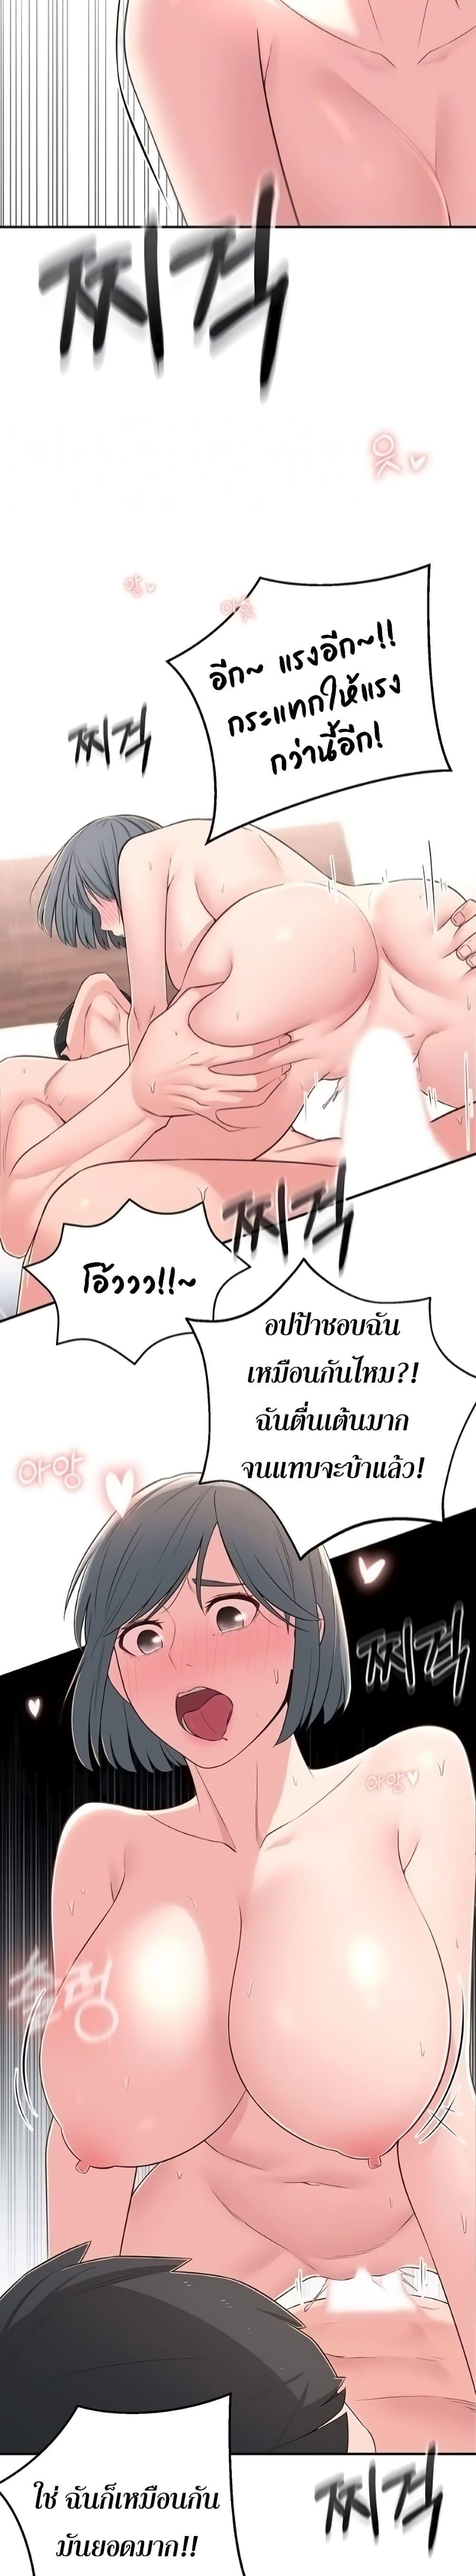 A Knowing Sister 7 ภาพ 2